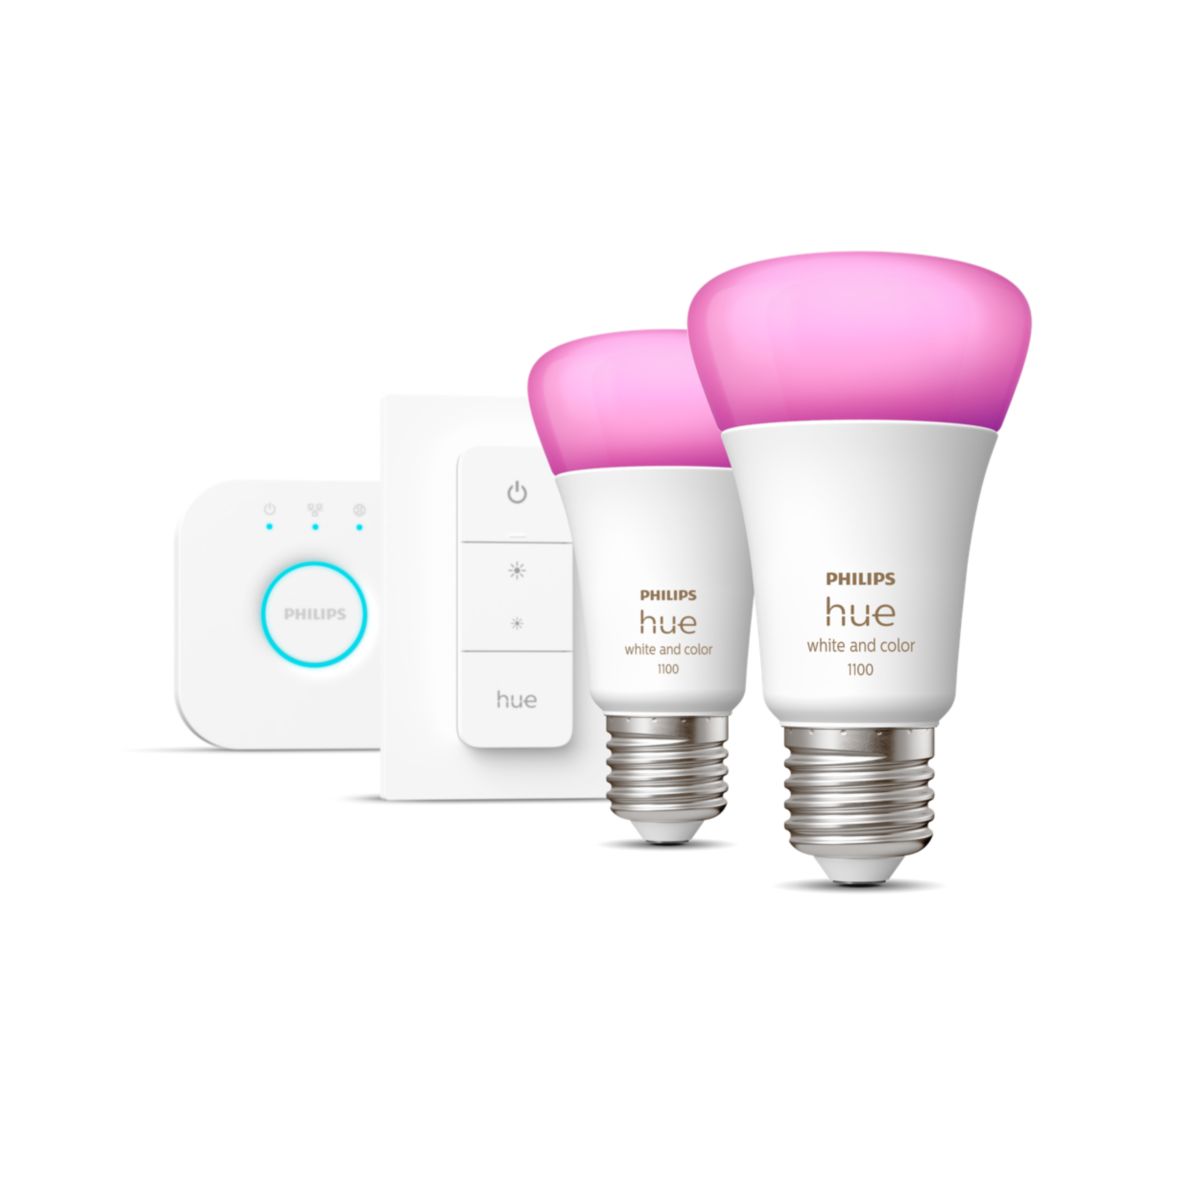 Philips Hue starterkit e27 white and color ambiance 1100lm 2x + dimmer switch